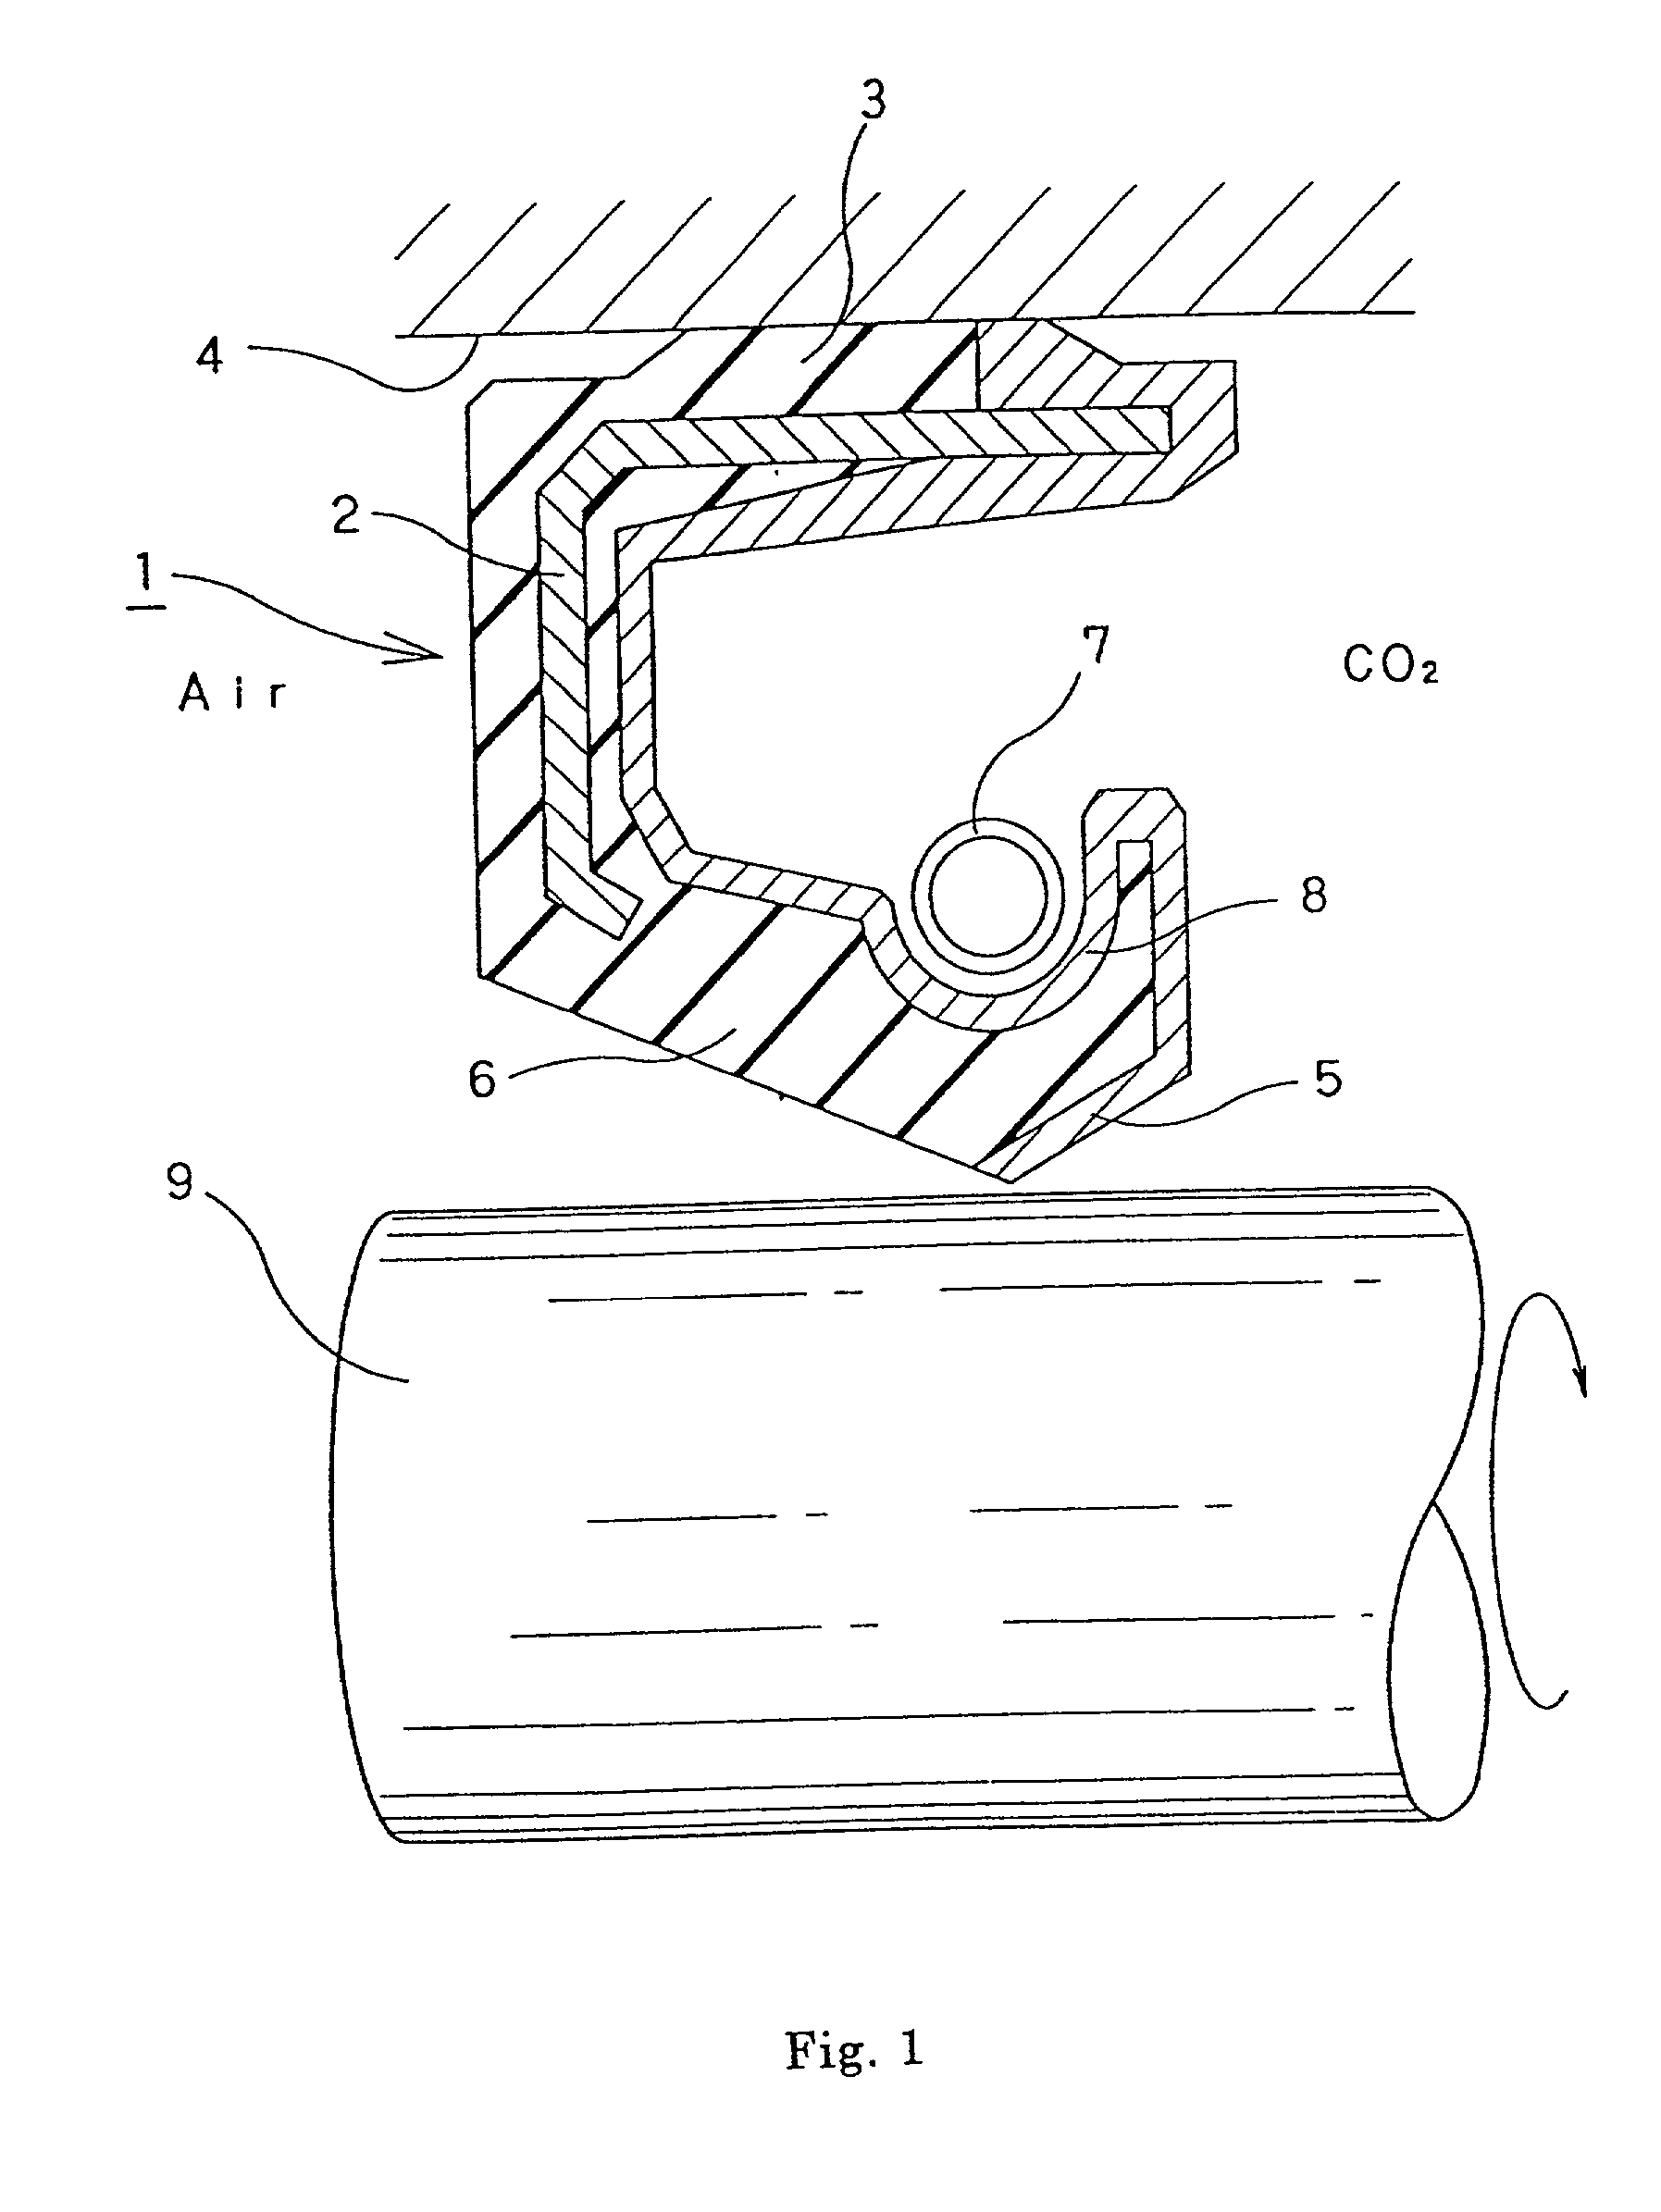 Method of preparing a molded sealing composition for sealing against permeation of carbon dioxide gas